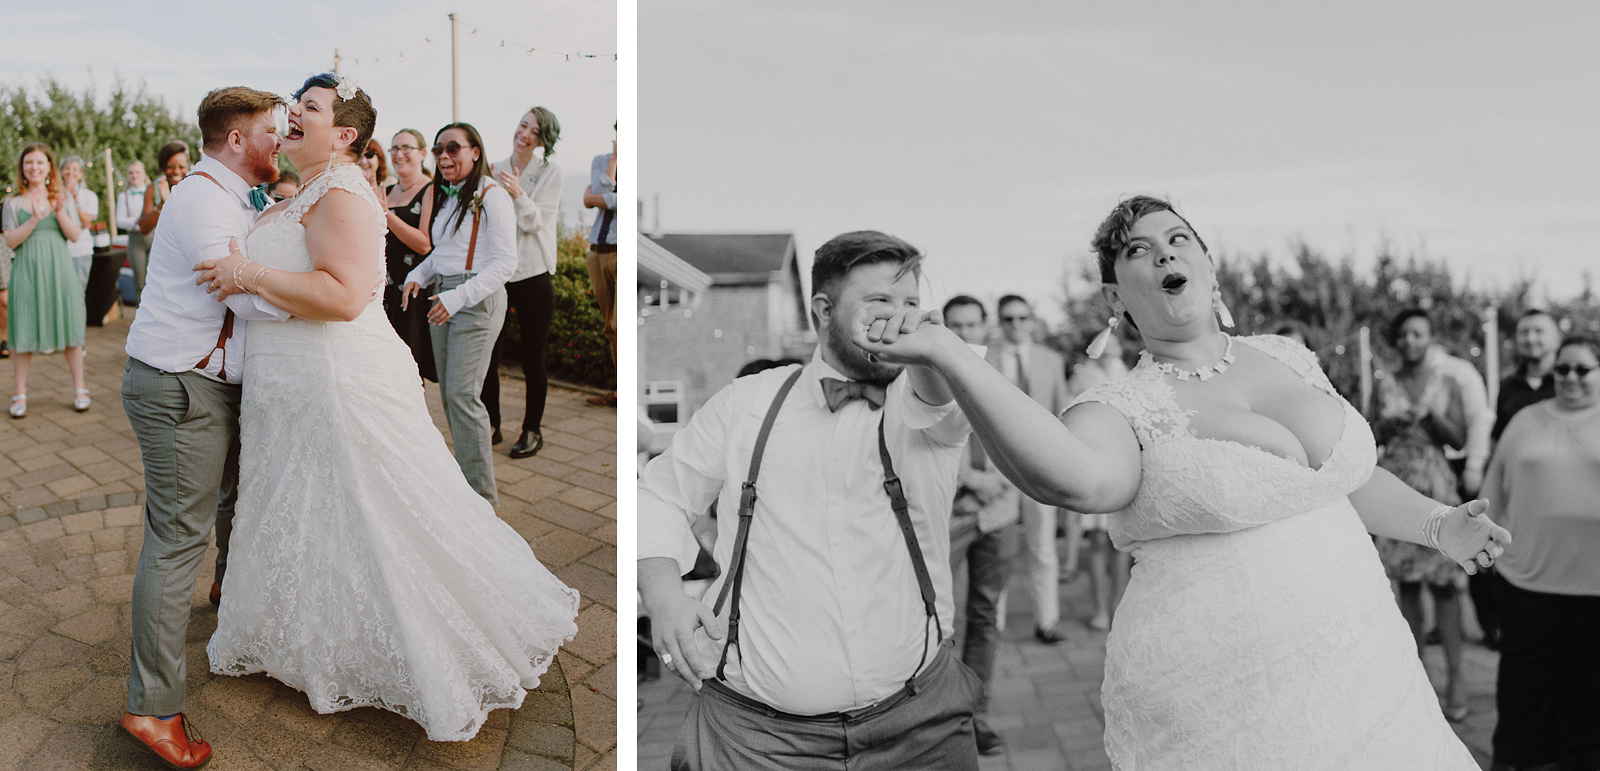 Bride laughing as the groom pulls her into the hora - Oceanside Community Club Wedding on the Oregon Coast” title=